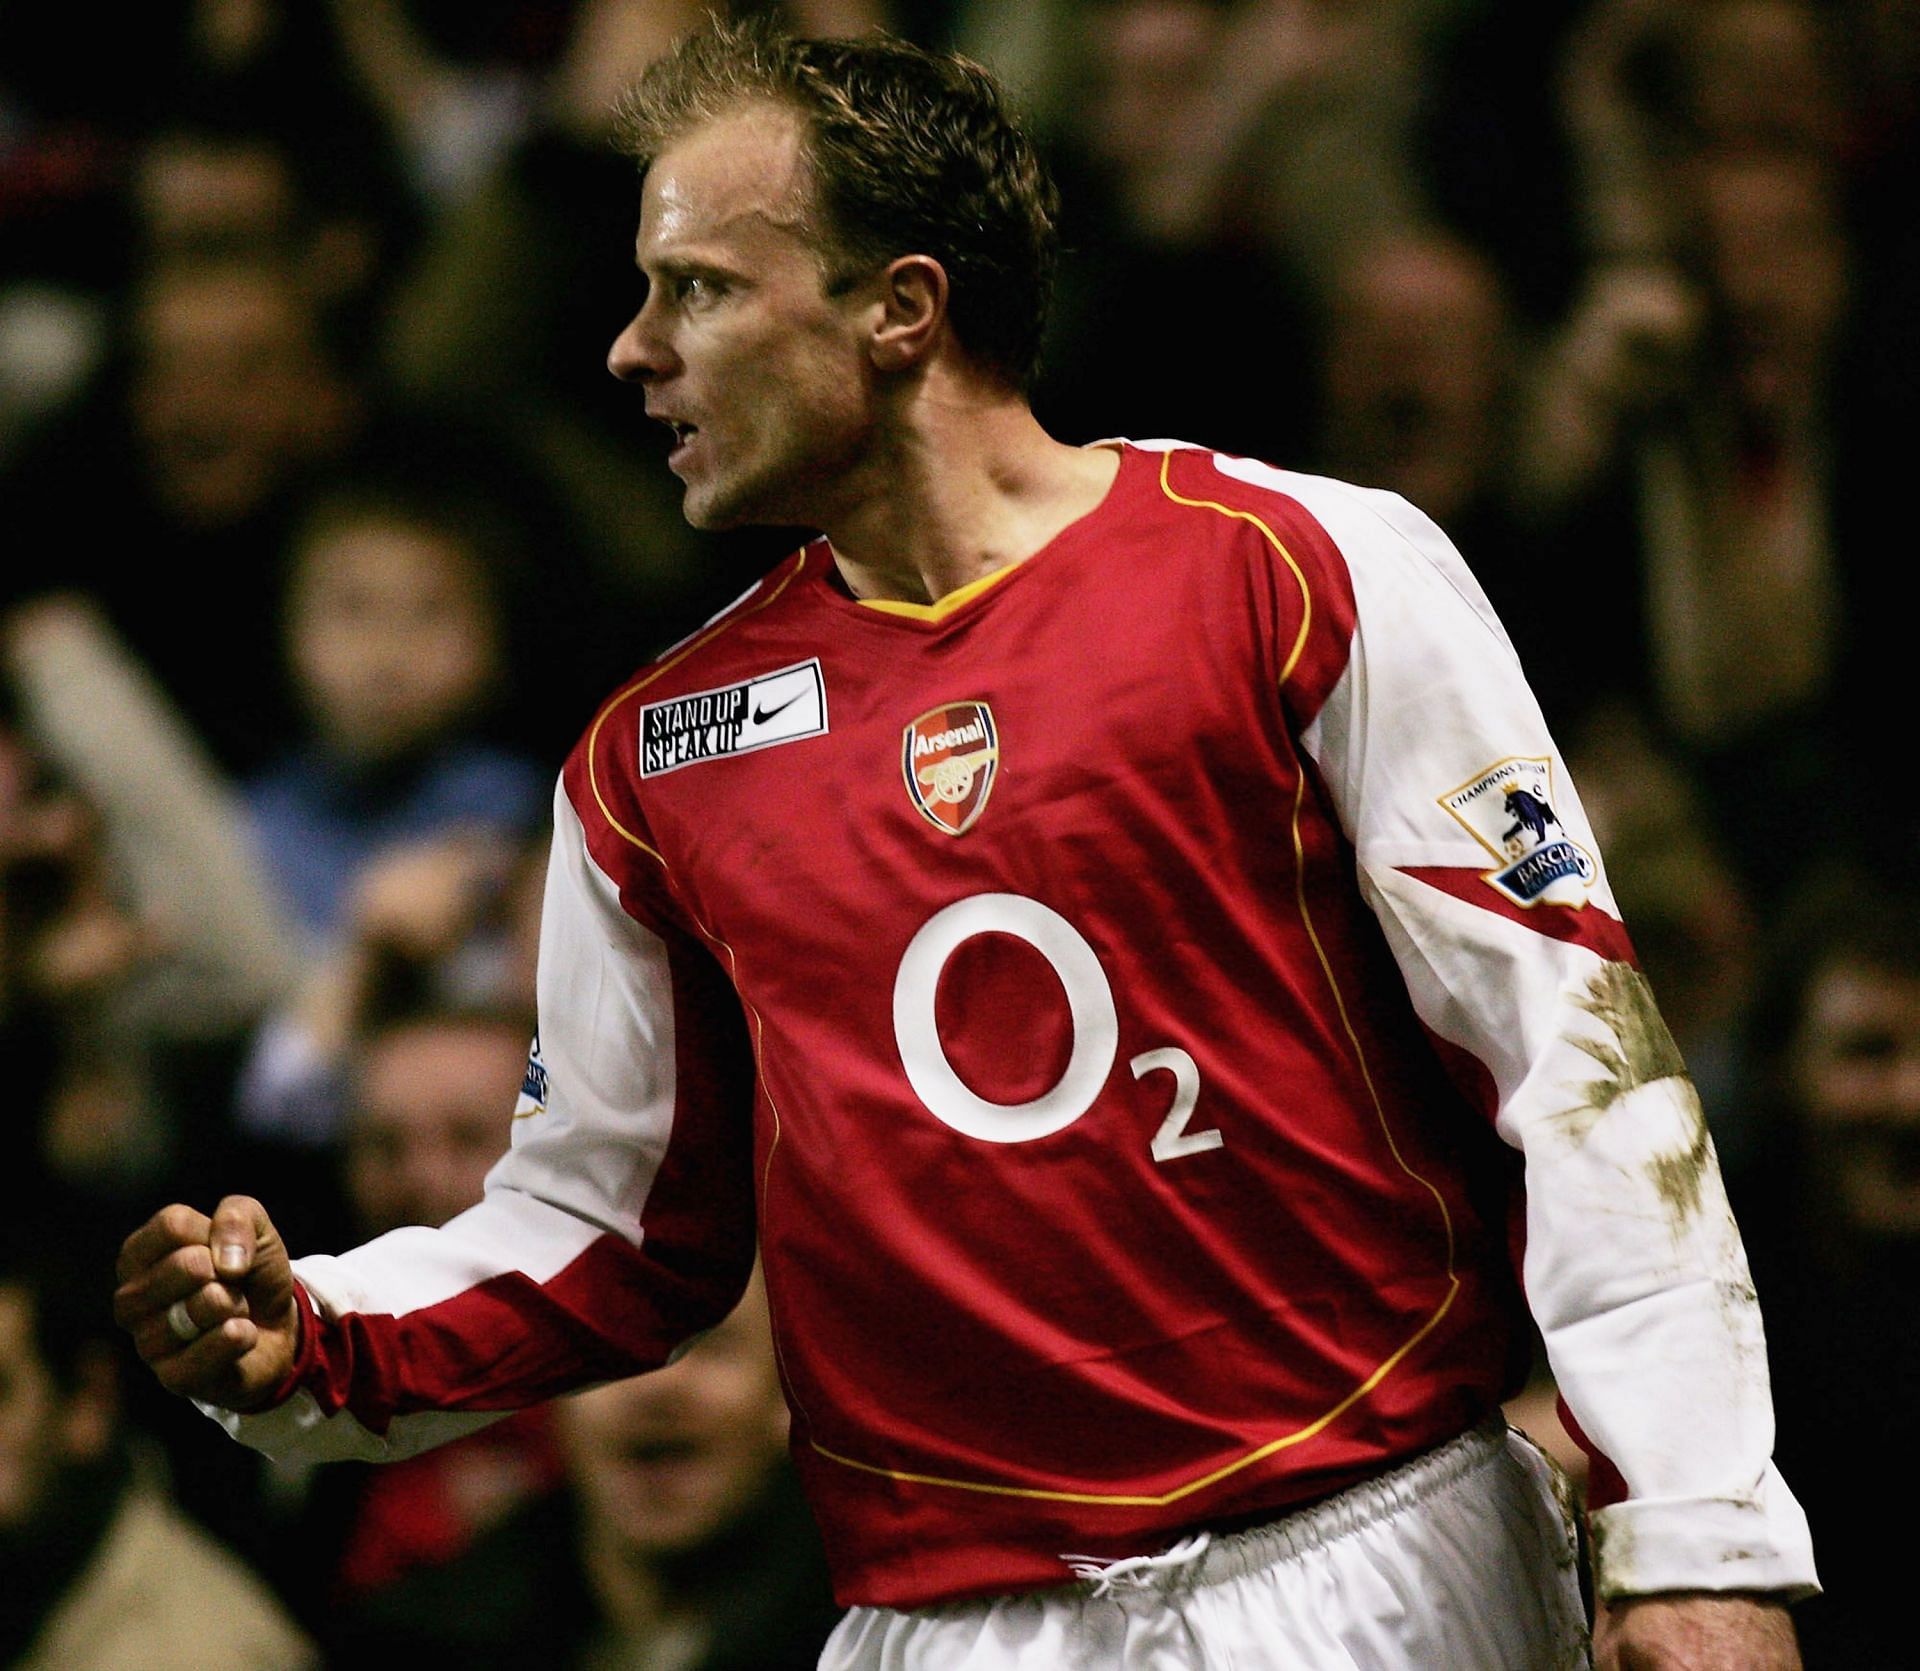 Bergkamp clicked in the Arsenal v Manchester United game